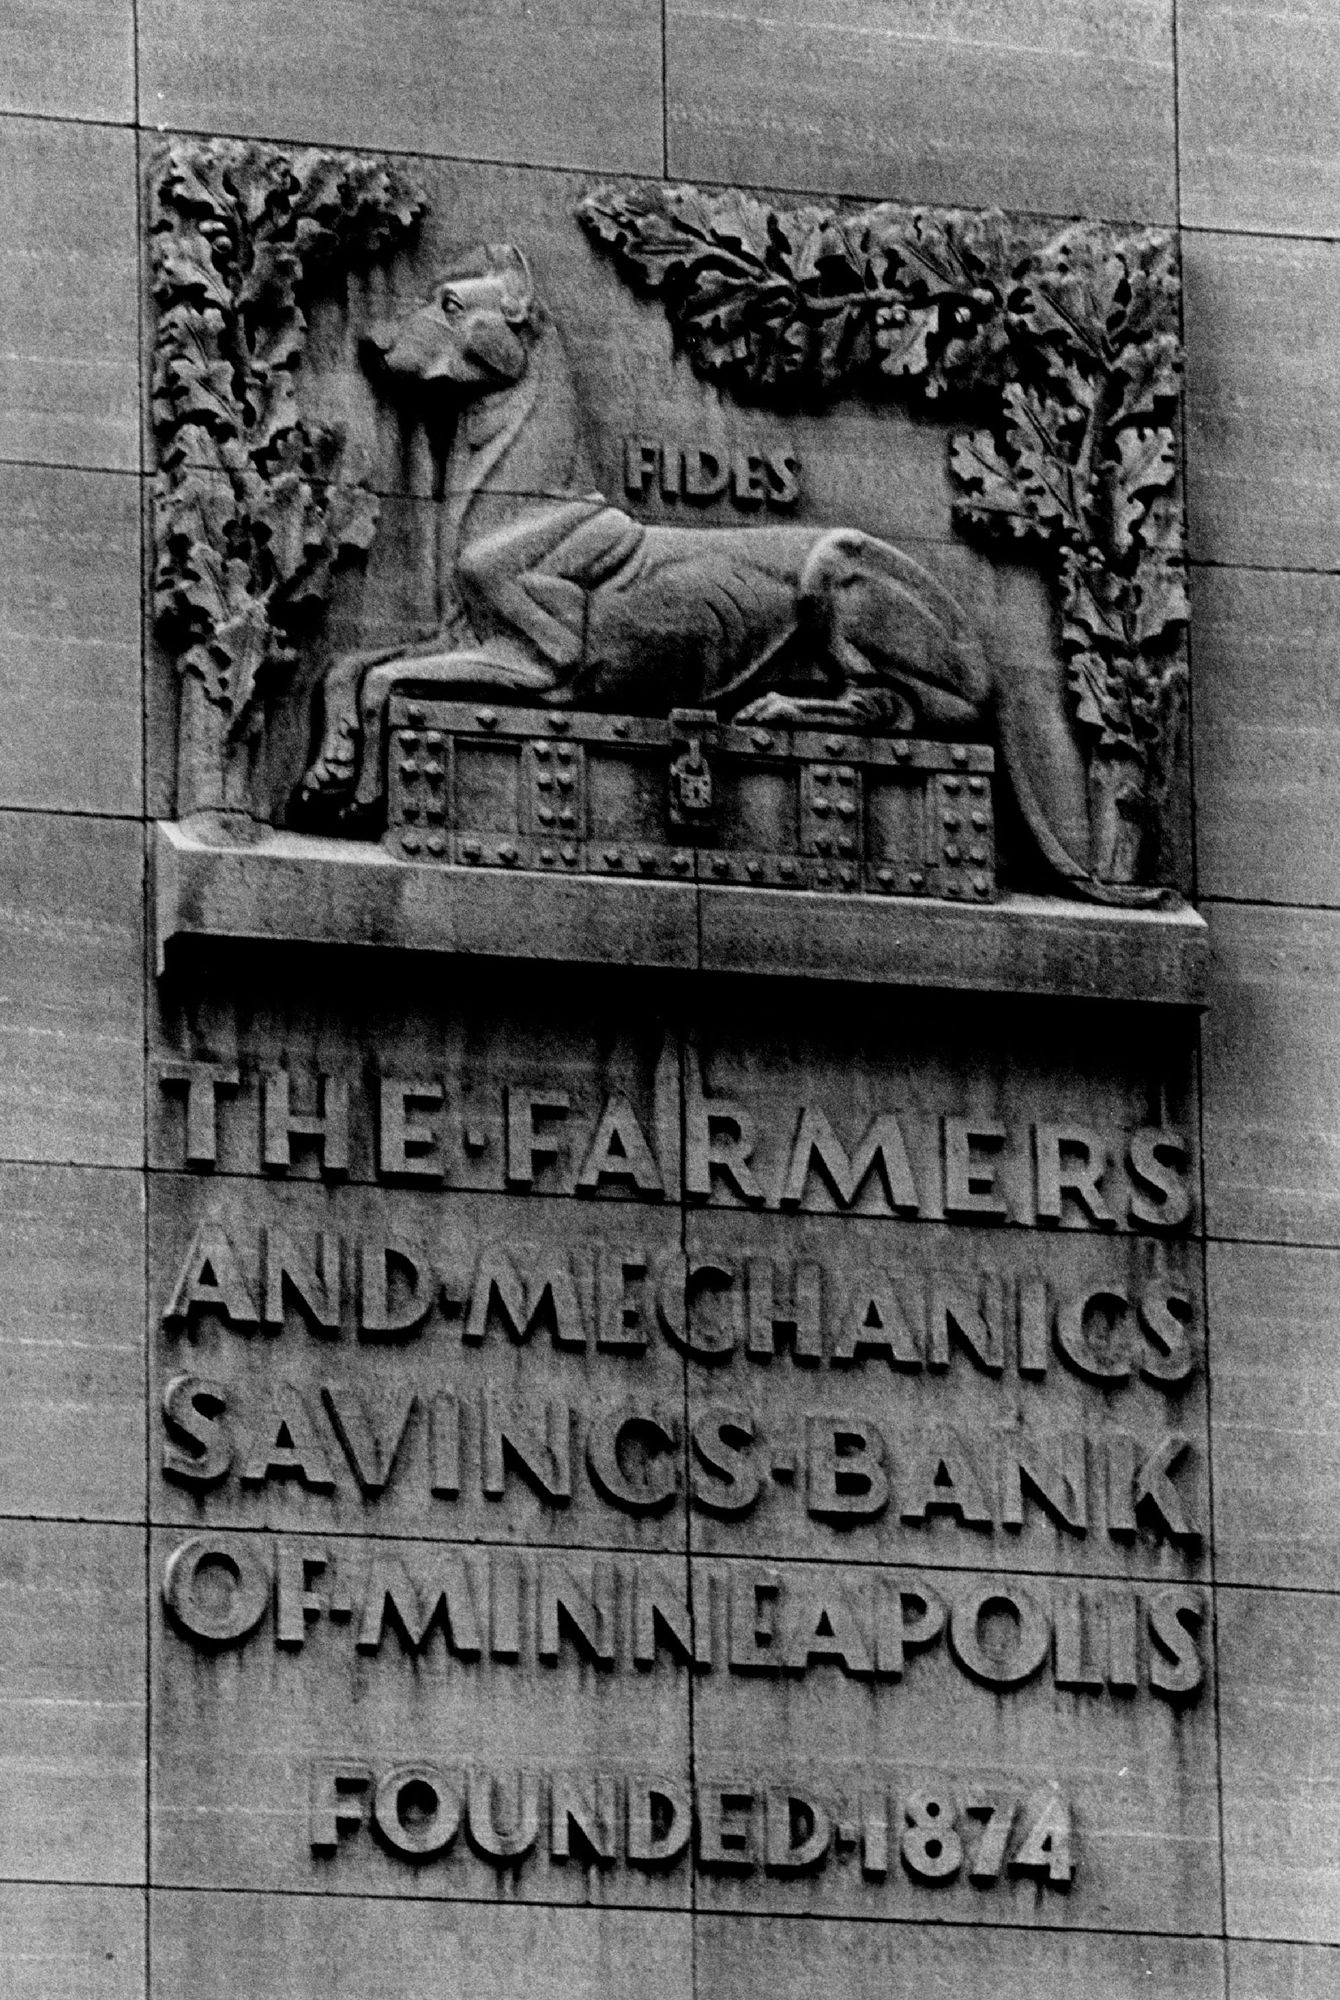 A Great Dane still guards the money box at the former Farmers and Mechanics Savings Bank, even though it's now the Minneapolis Westin Hotel.